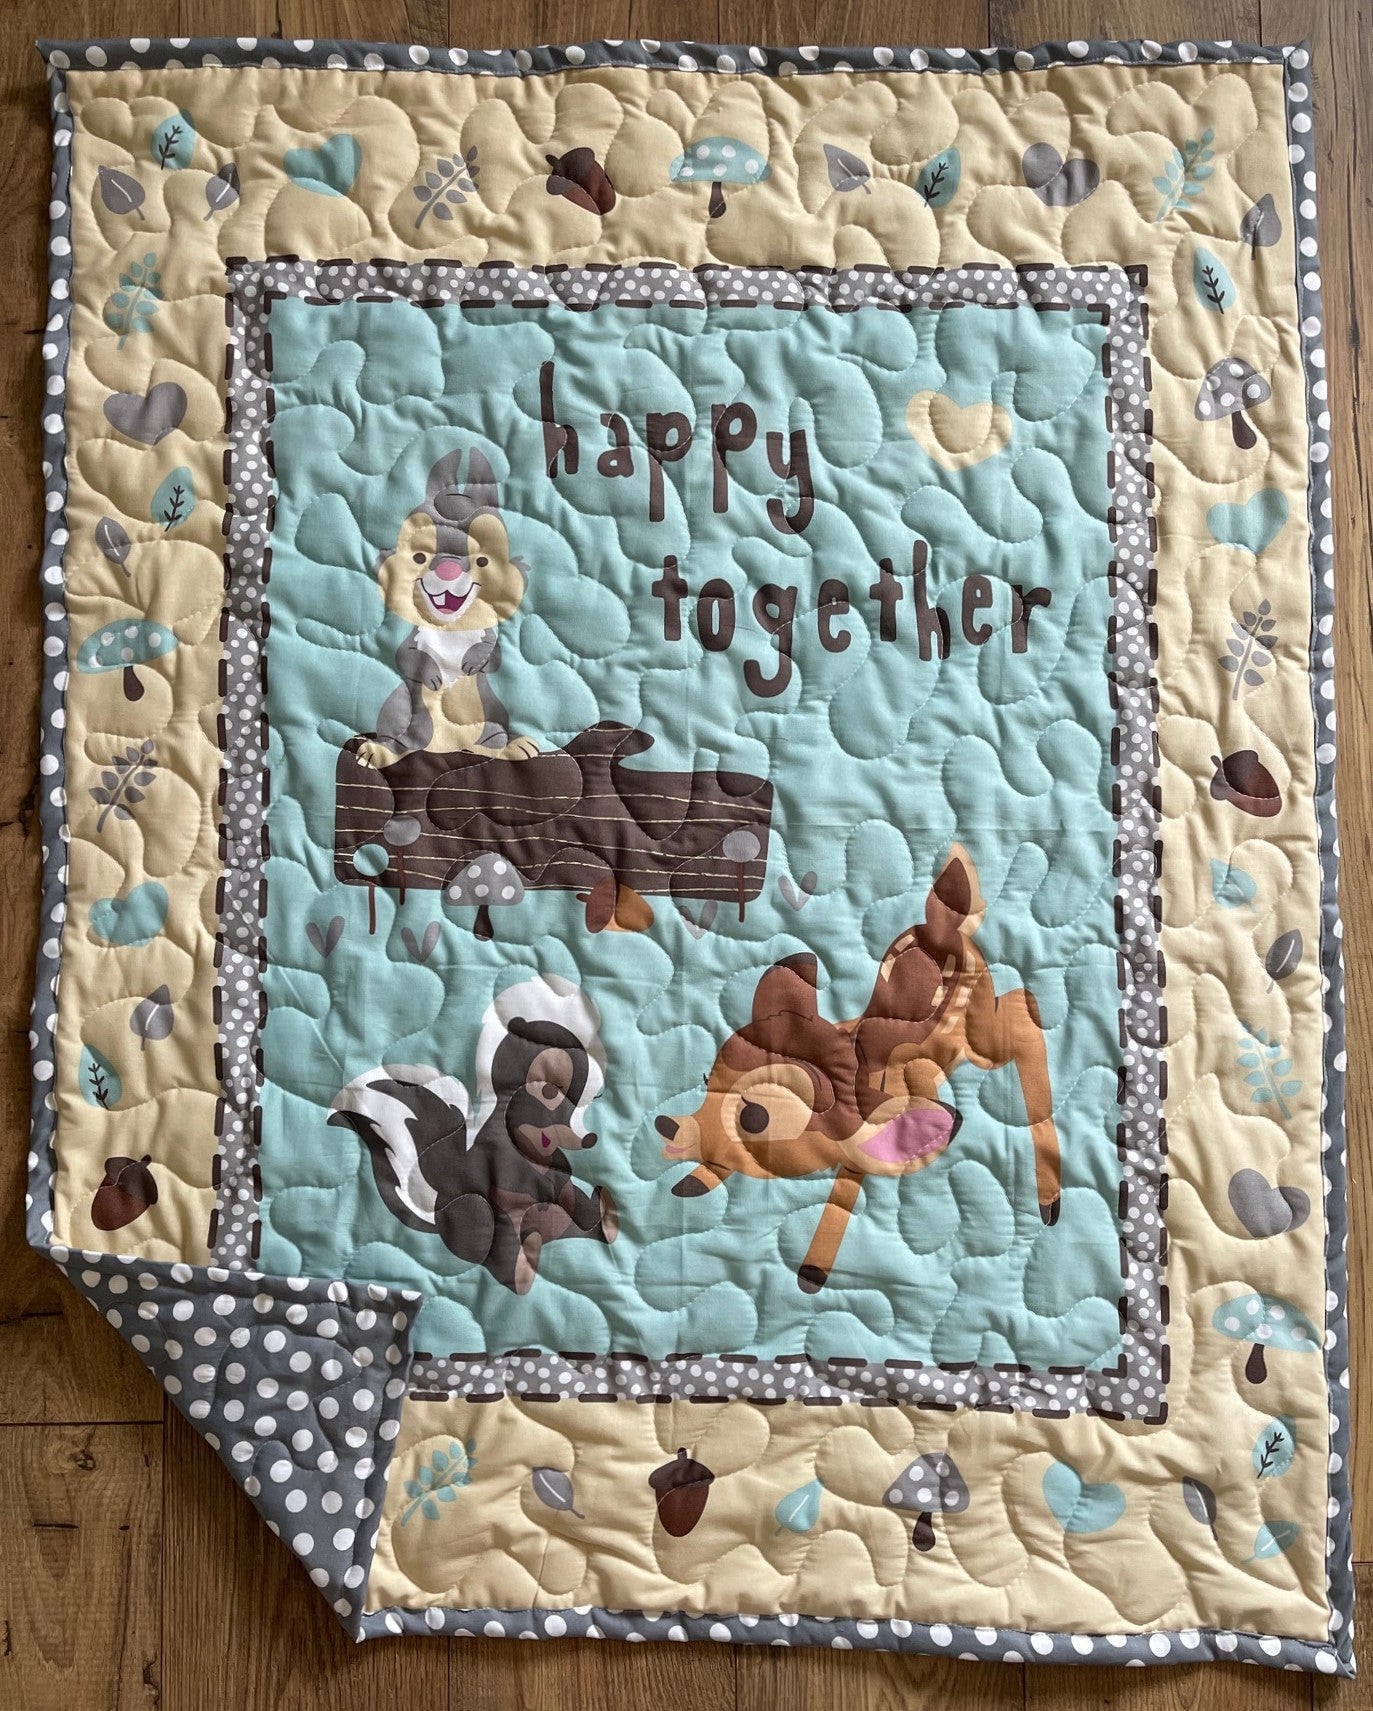 BAMBI & THUMPER Inspired FRIENDS TOGETHER Quilted Blanket 36"X44" WOODLAND THEME 1 AVAILABLE